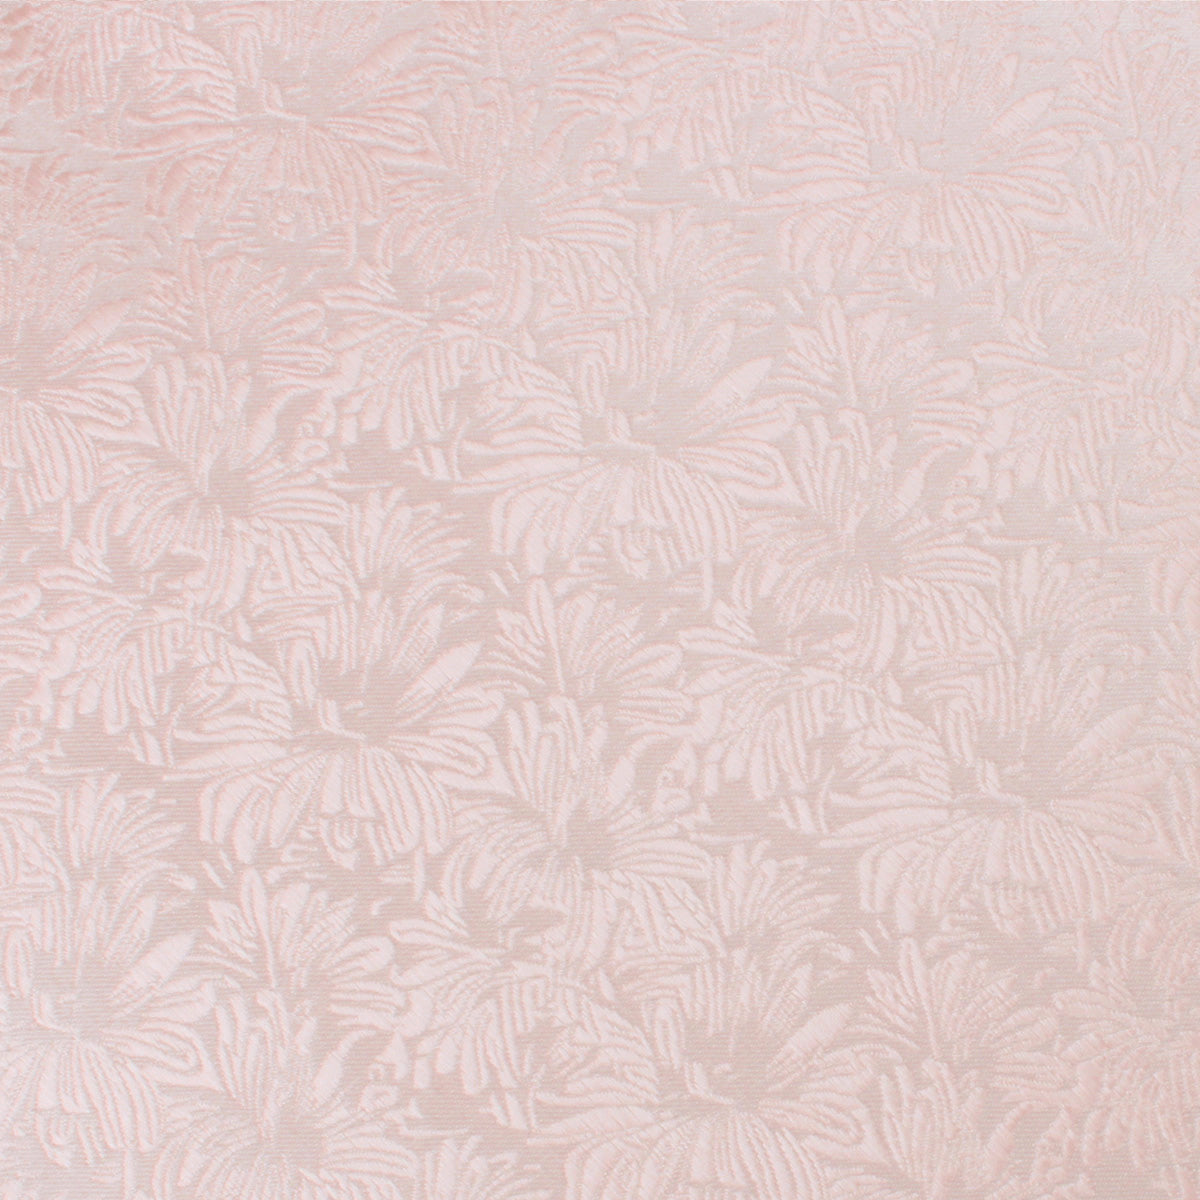 Blush Pink Daisy Flowers Floral Pocket Square Fabric